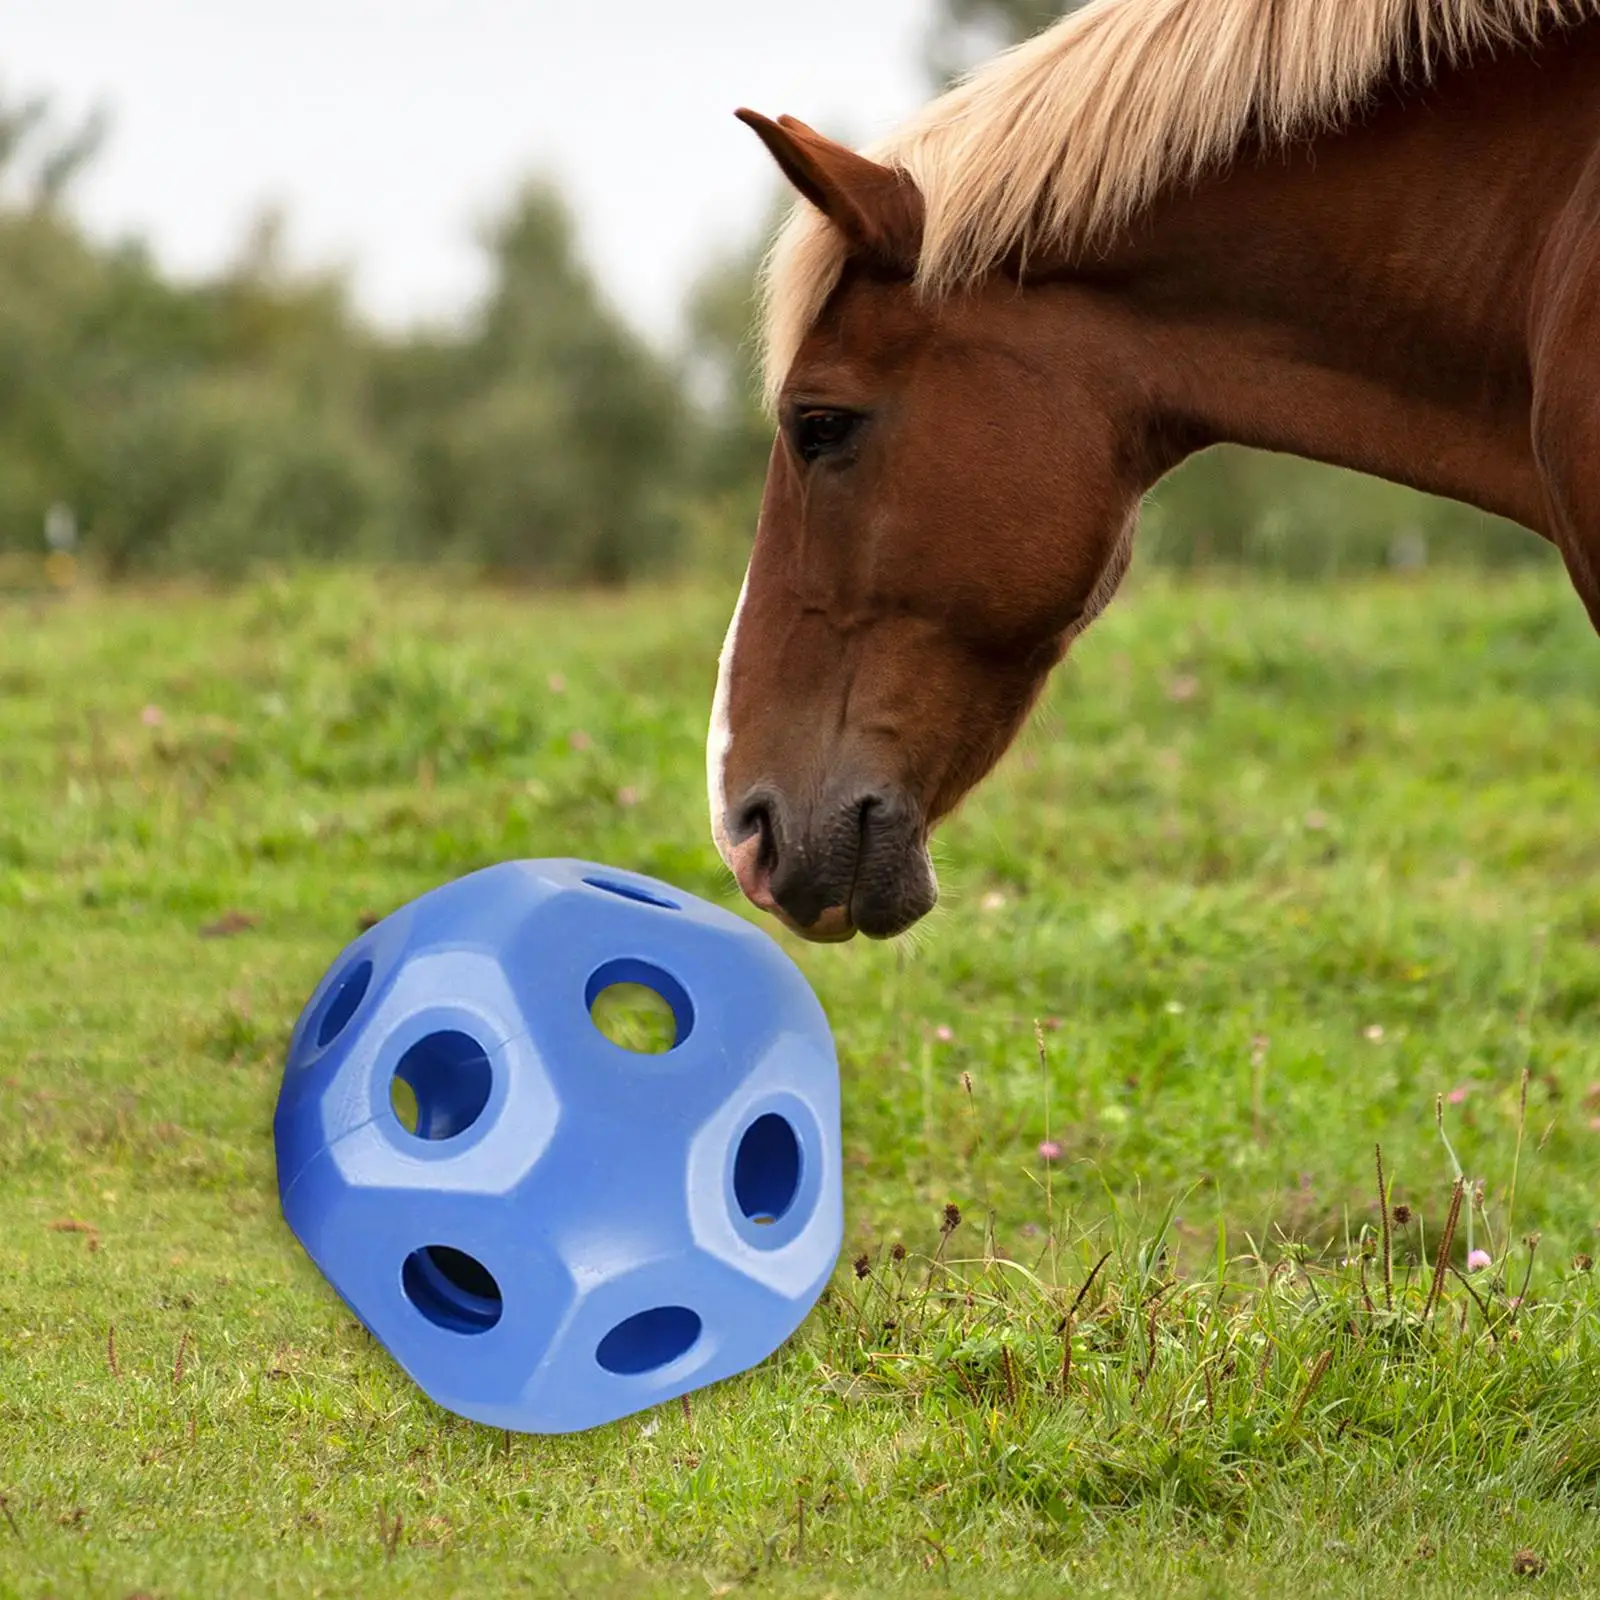 Fun Horse Treat Ball Slow Feed Hay Ball Hay Feeding Toy Hay Feeder Ball Horse Feeder Toys for Horse Stable Stall Trailer Rest